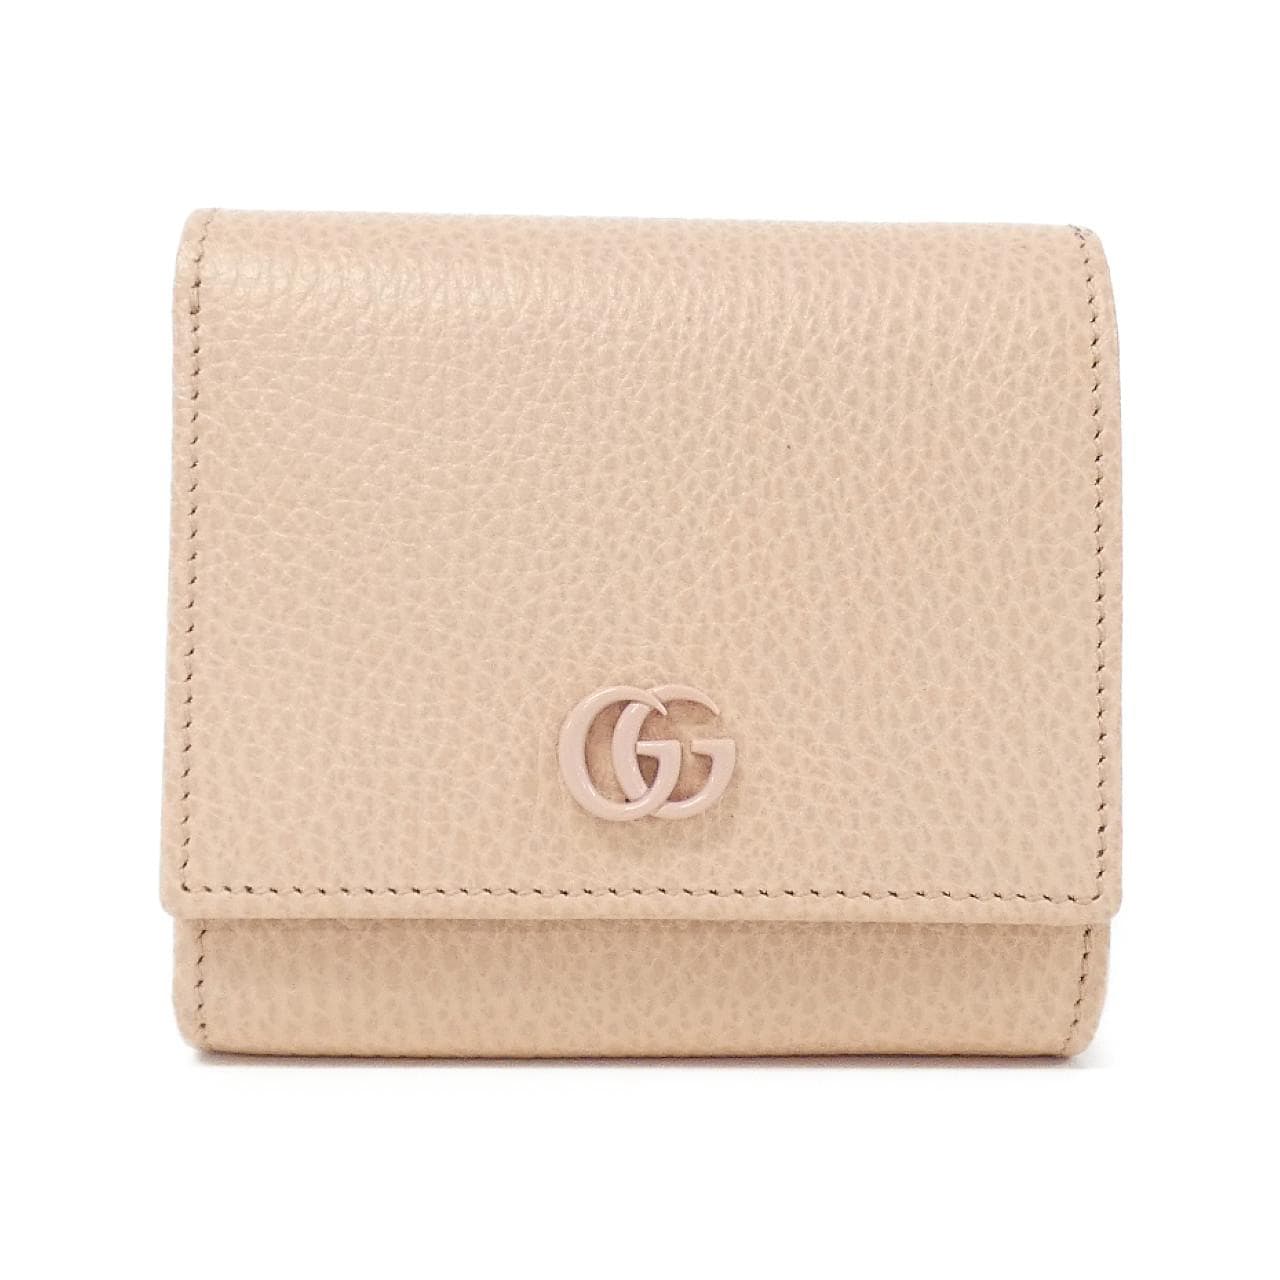 Gucci GG MARMONT 598587 17WEF Wallet